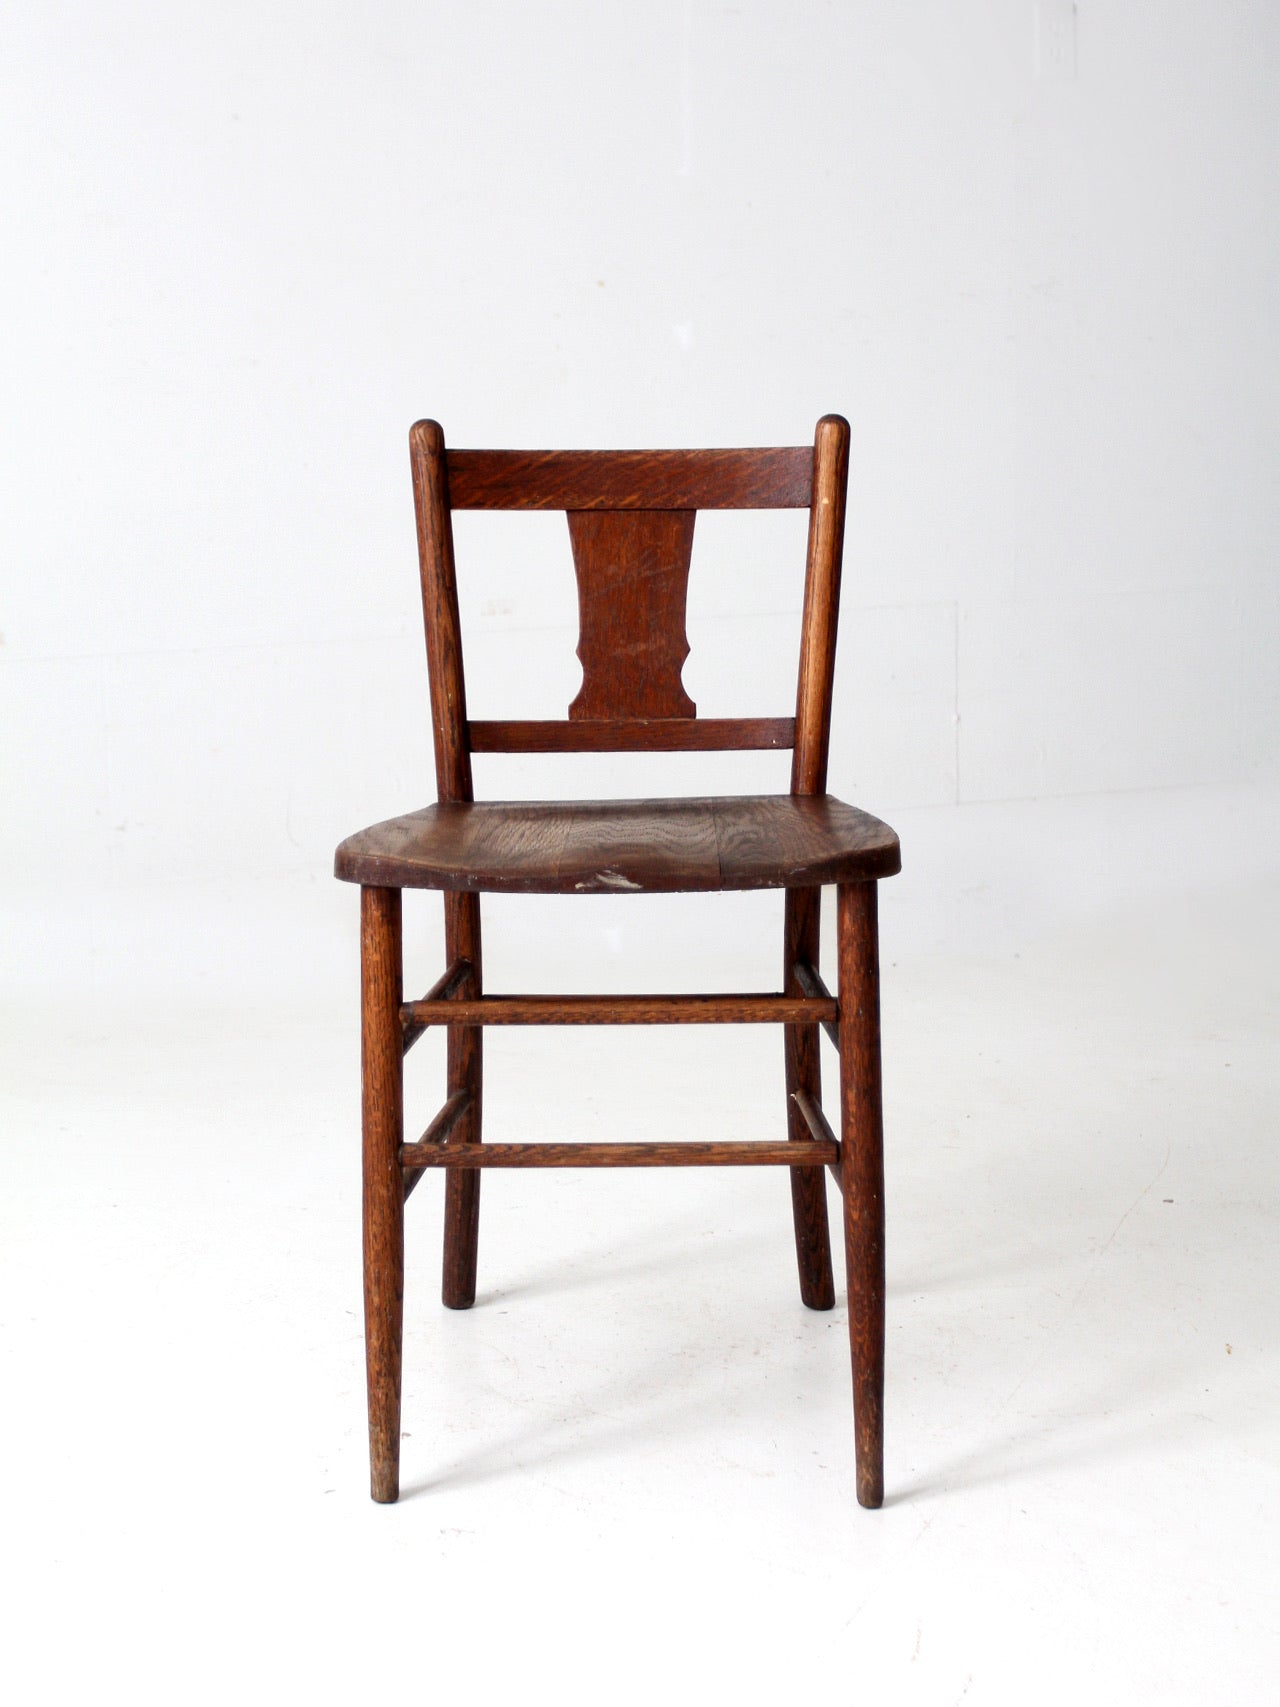 antique accent chair with low back